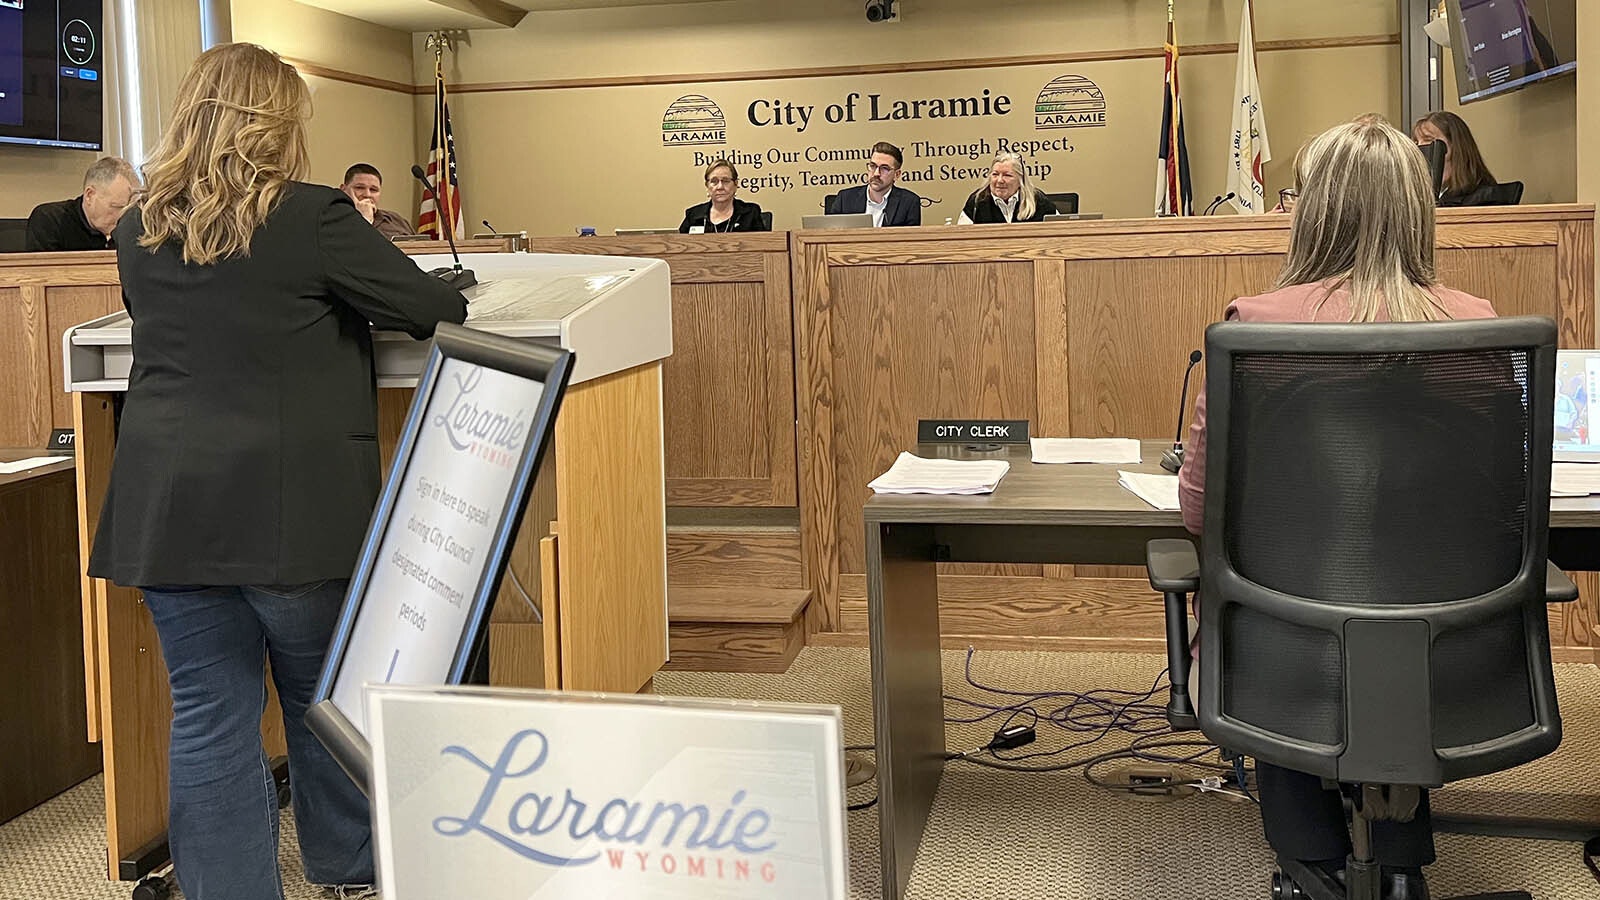 More than 30 people testified against a proposed apartment building in downtown Laramie before the city council late Tuesday. The council voted to kill the project.